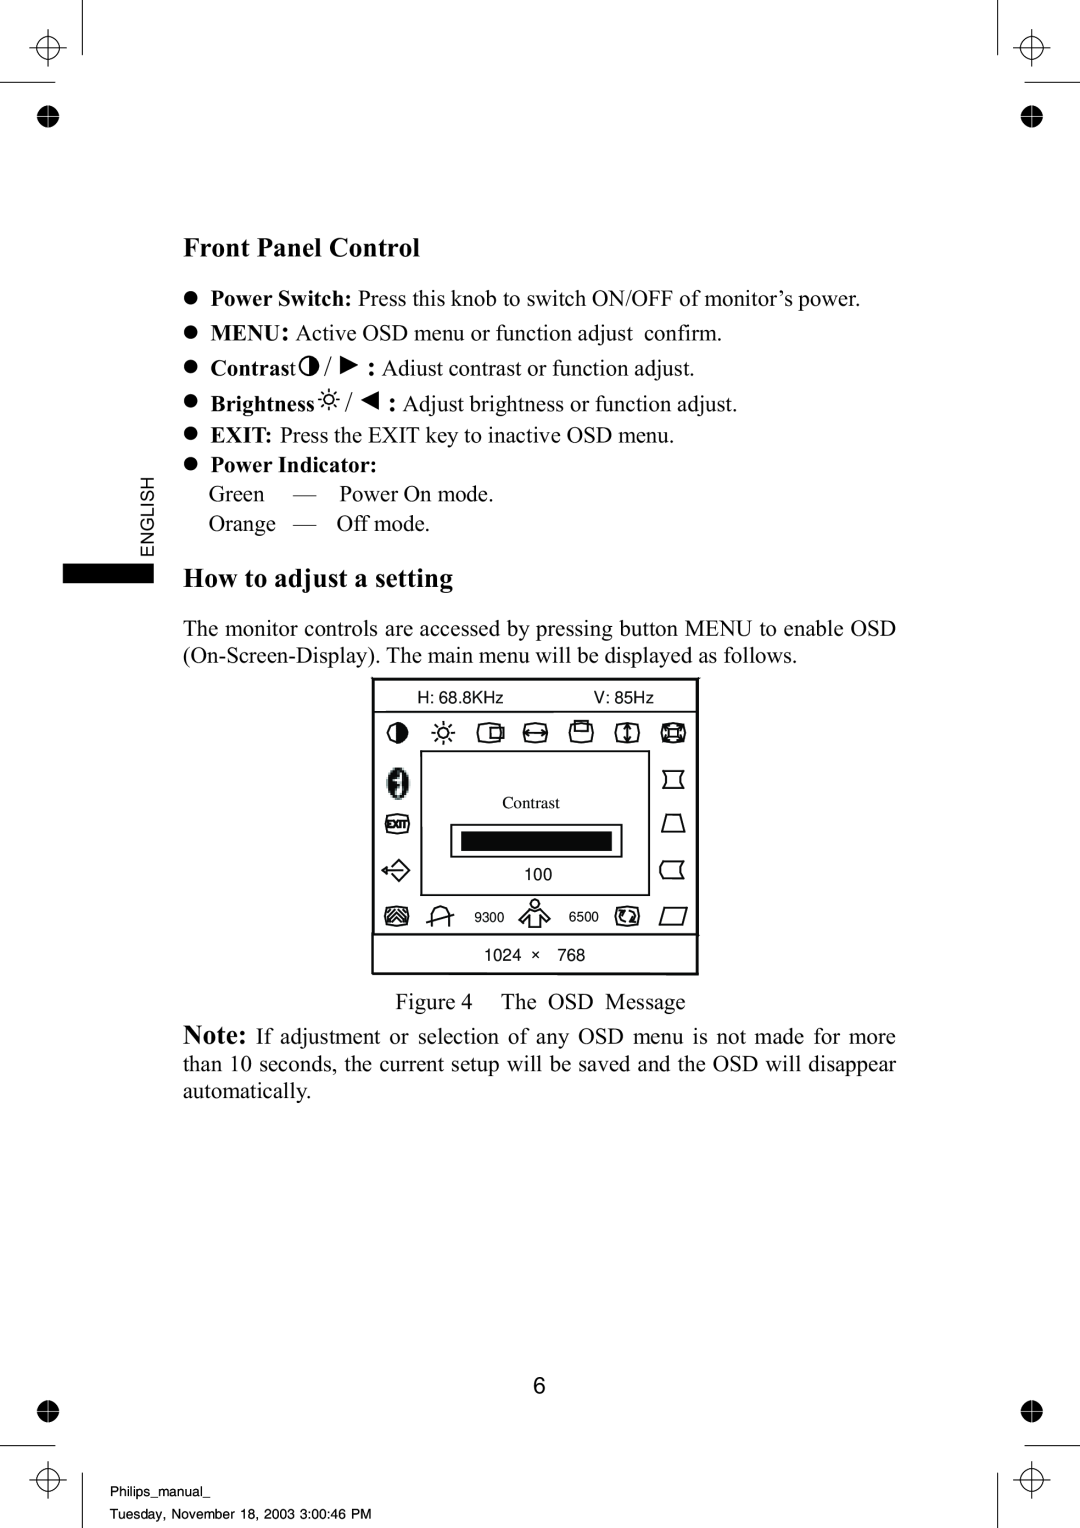 Philips 109B61 manual Front Panel Control, How to adjust a setting, Power Indicator 